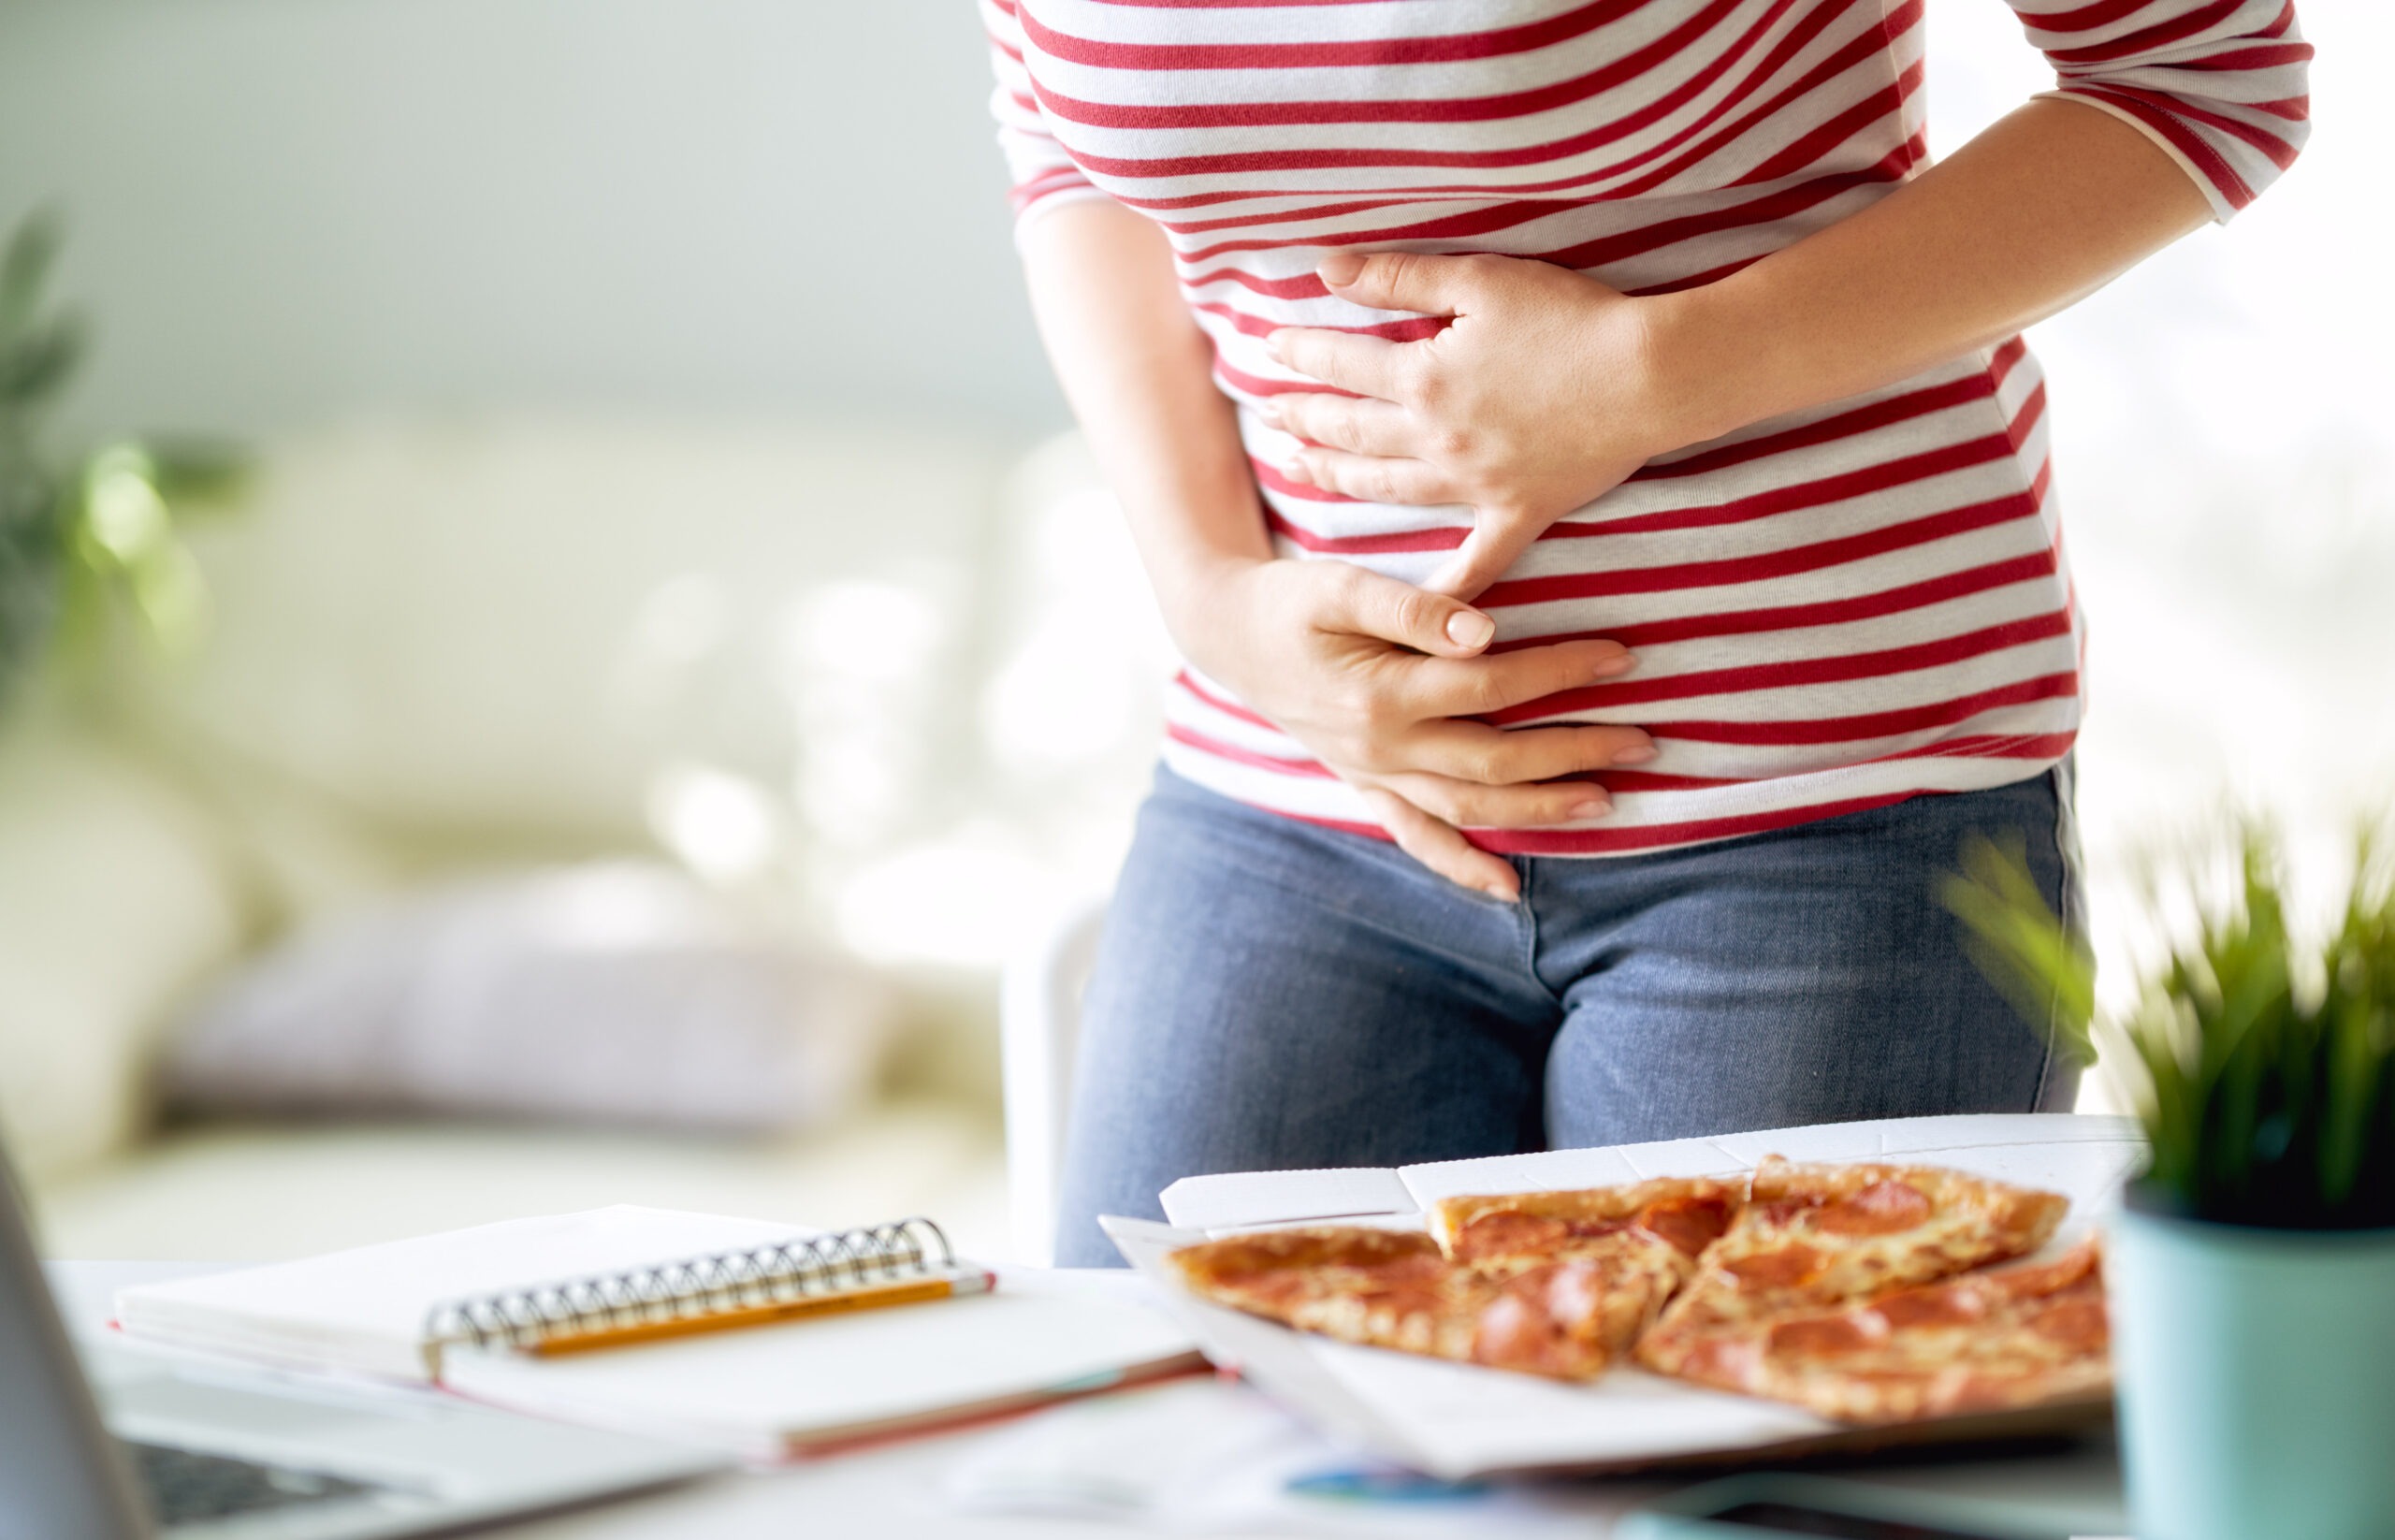 pizza can cause mcas symptoms. Woman holding stomach after eating pizzA